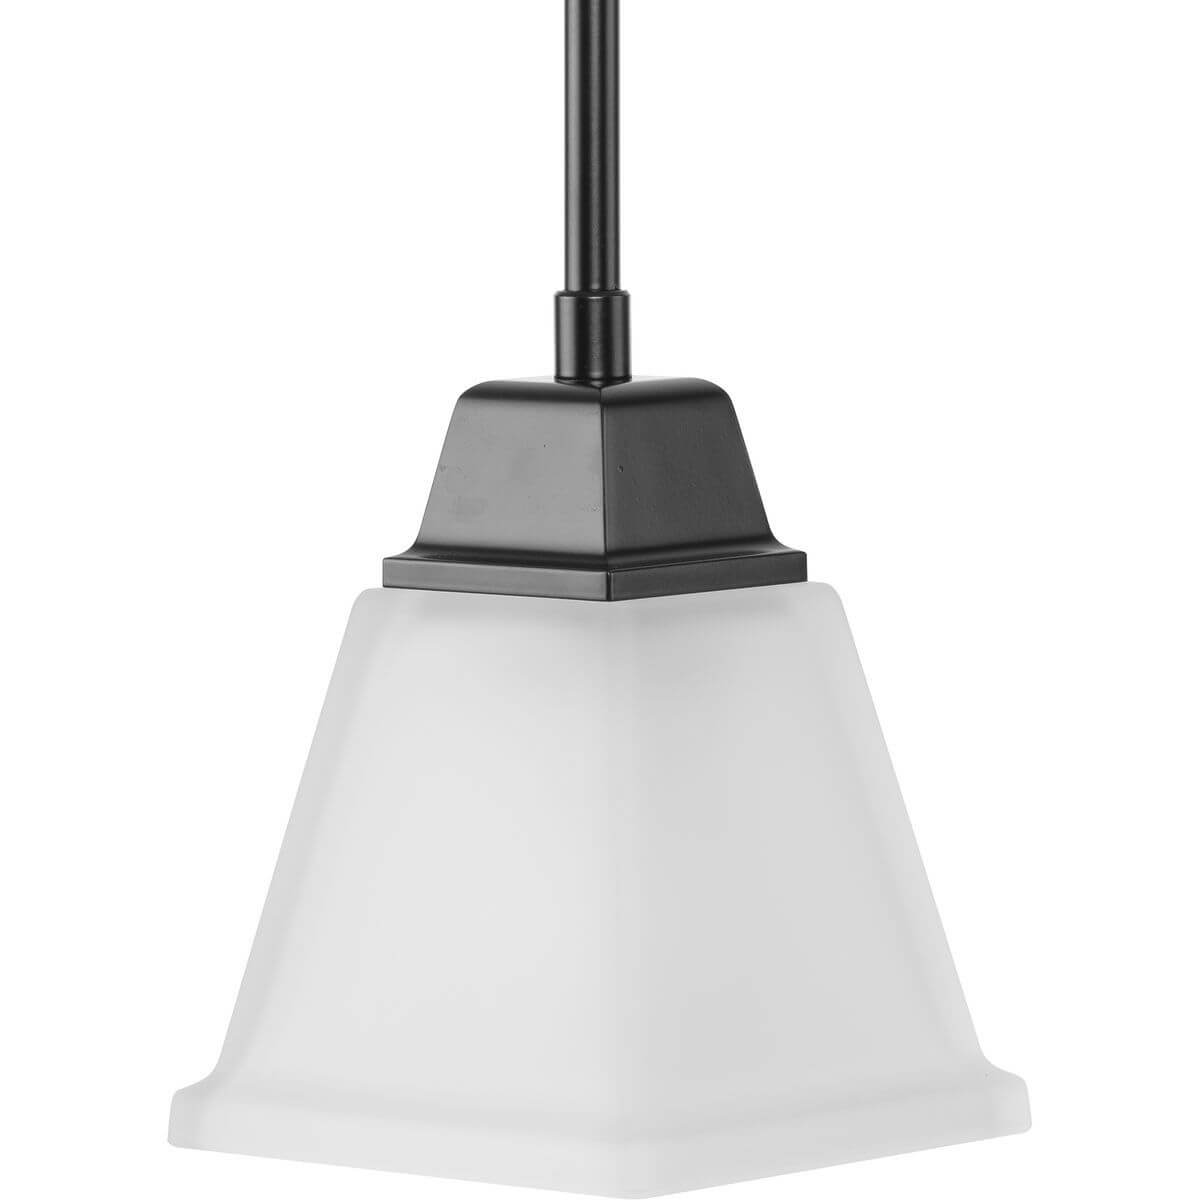 Progress Lighting Clifton Heights 1 Light 6 inch Mini Pendant in Matte Black with Etched Glass P500125-31M